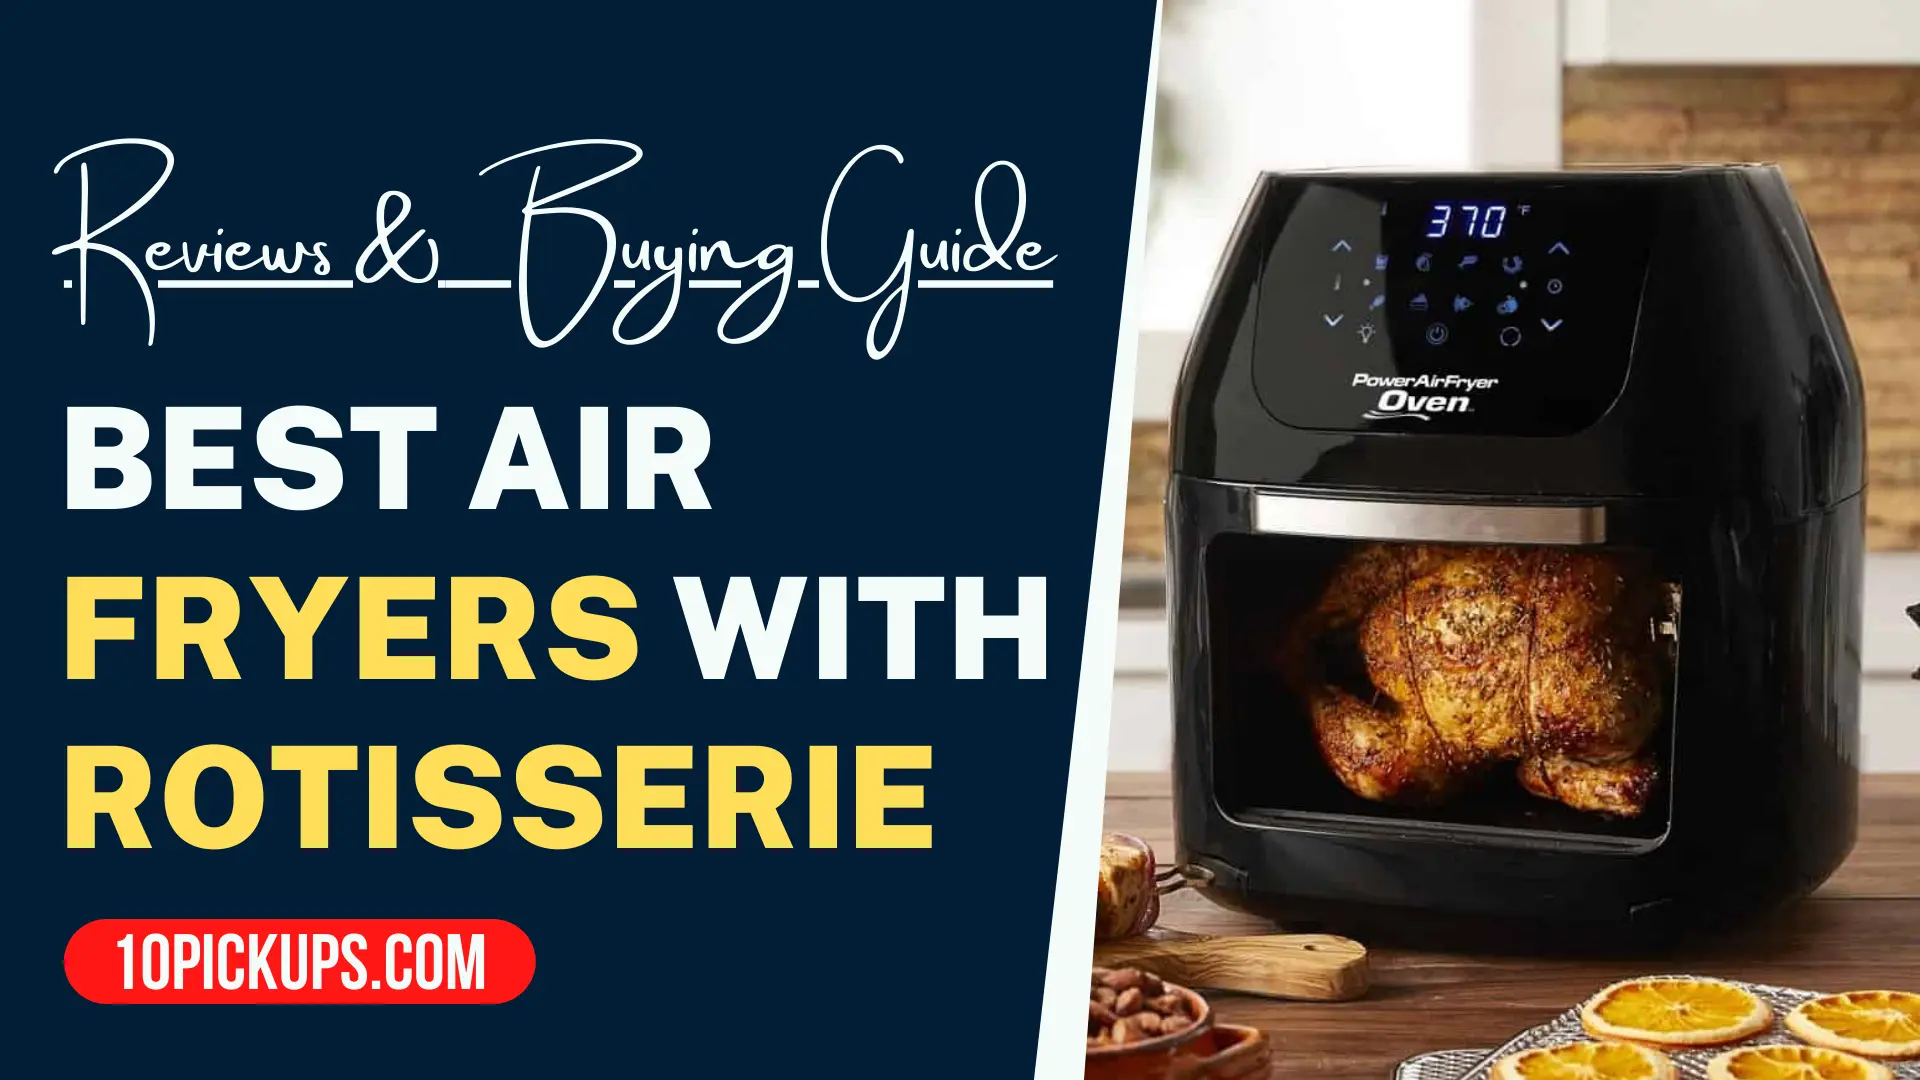 10 Best Air fryers with Rotisserie to purchase in 2022